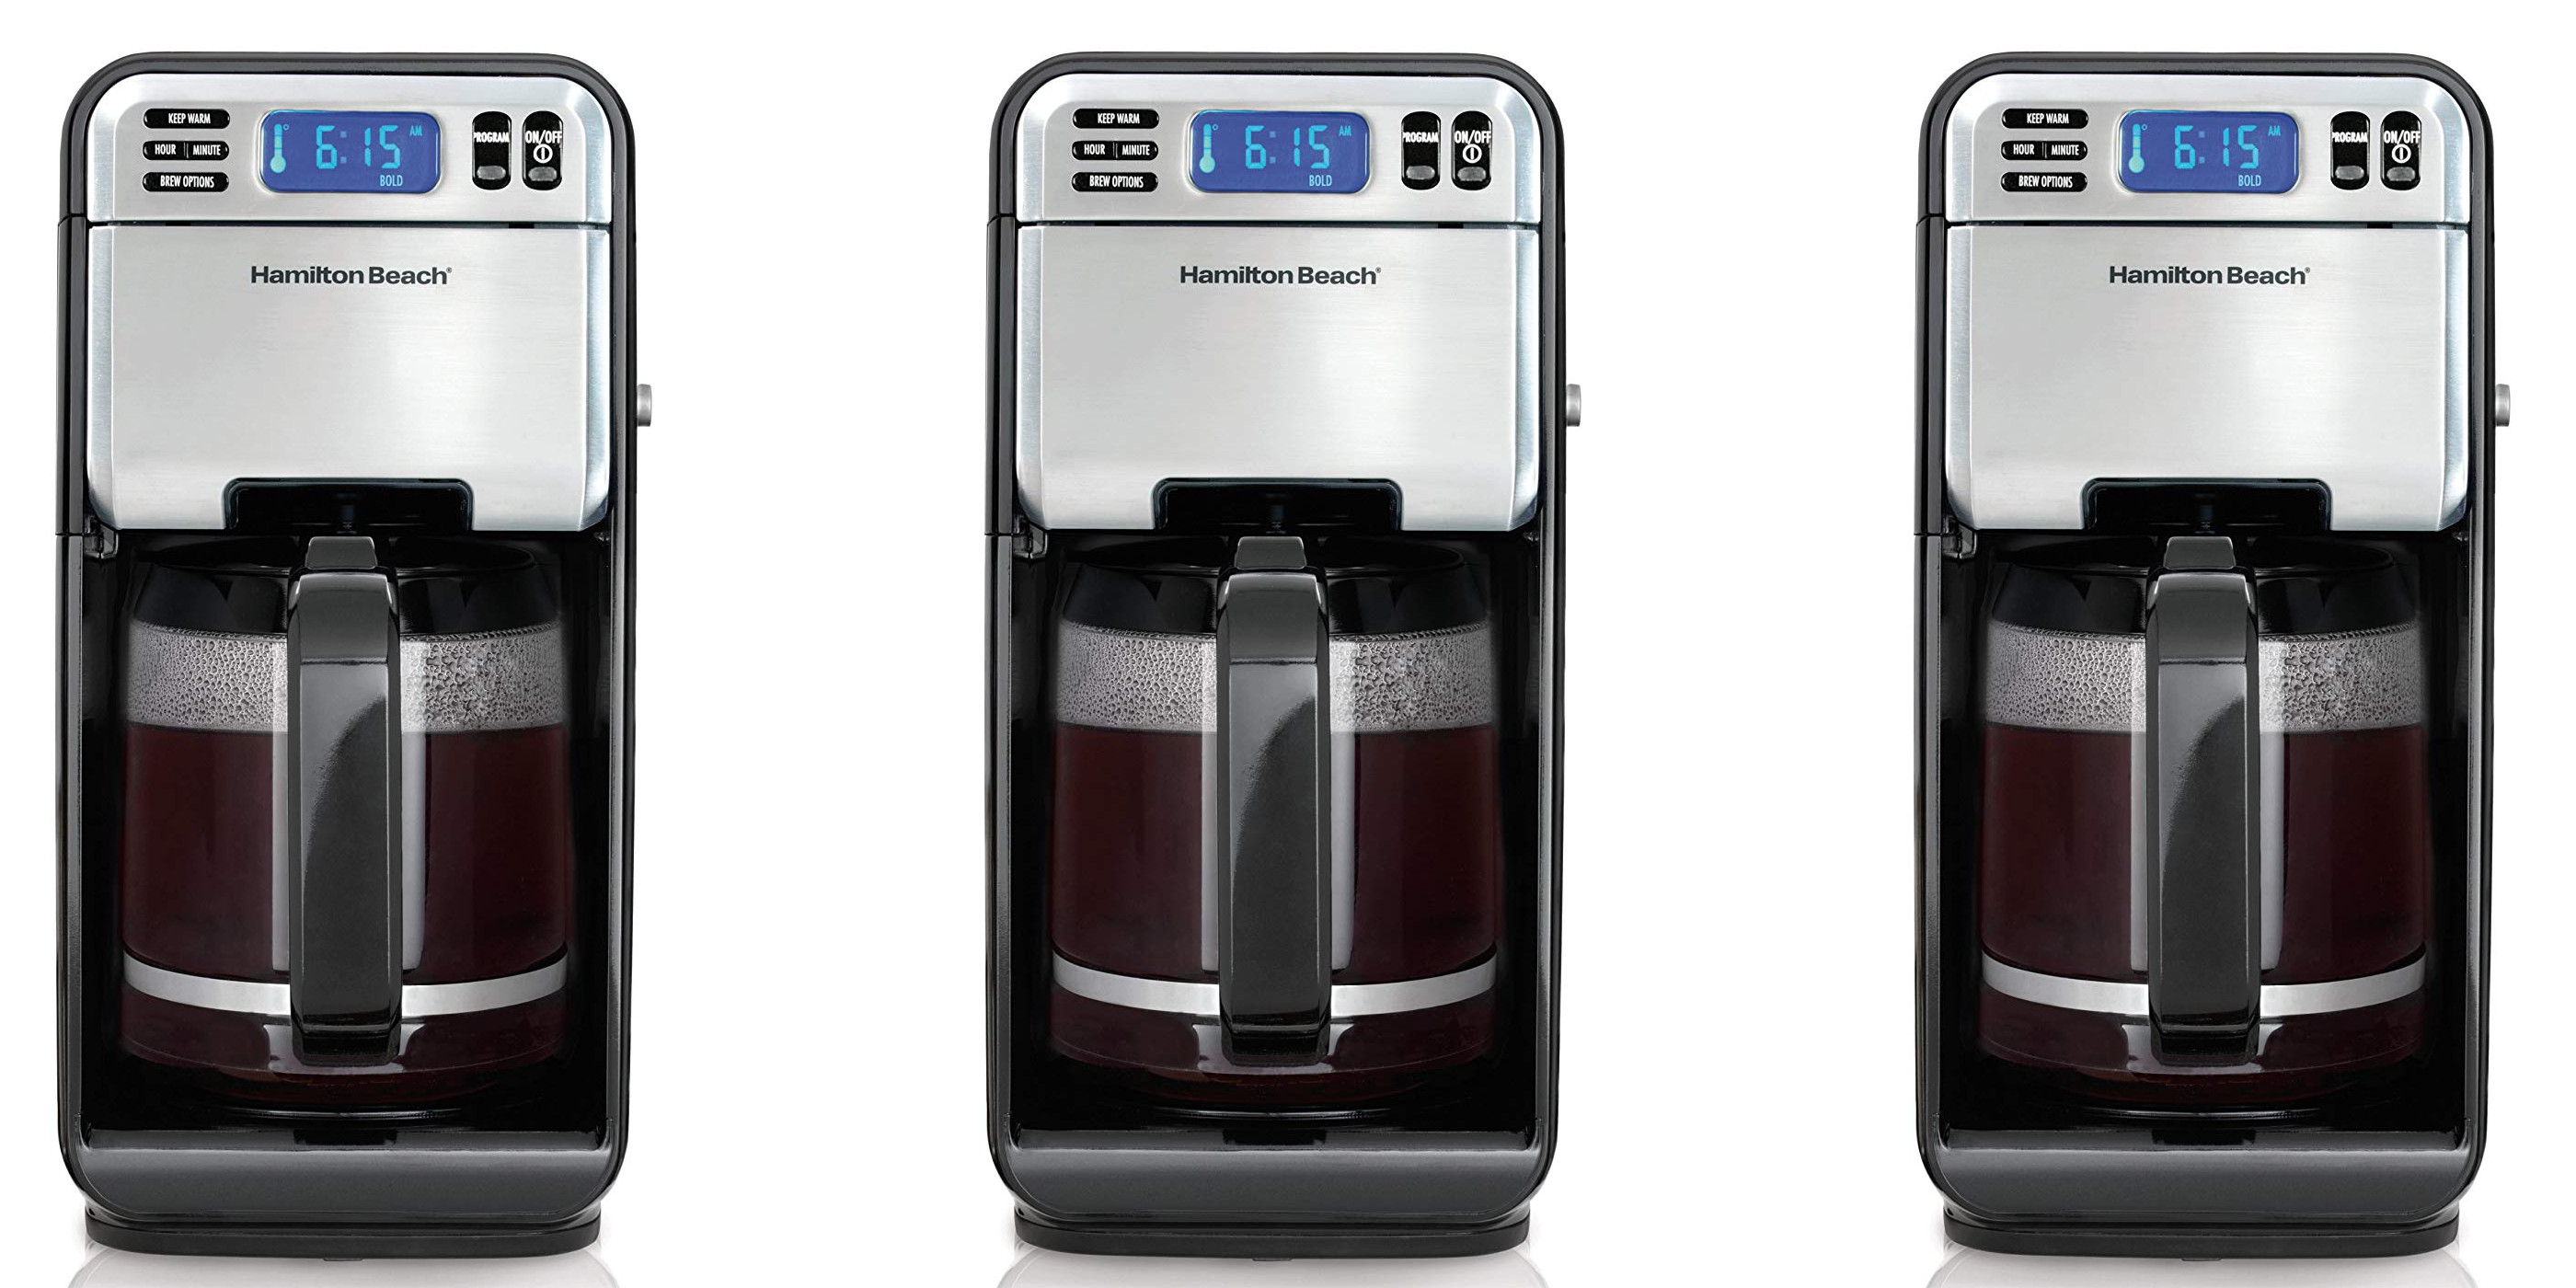 Hamilton Beach's 12-Cup Coffee Maker w/ LCD display is down to $28